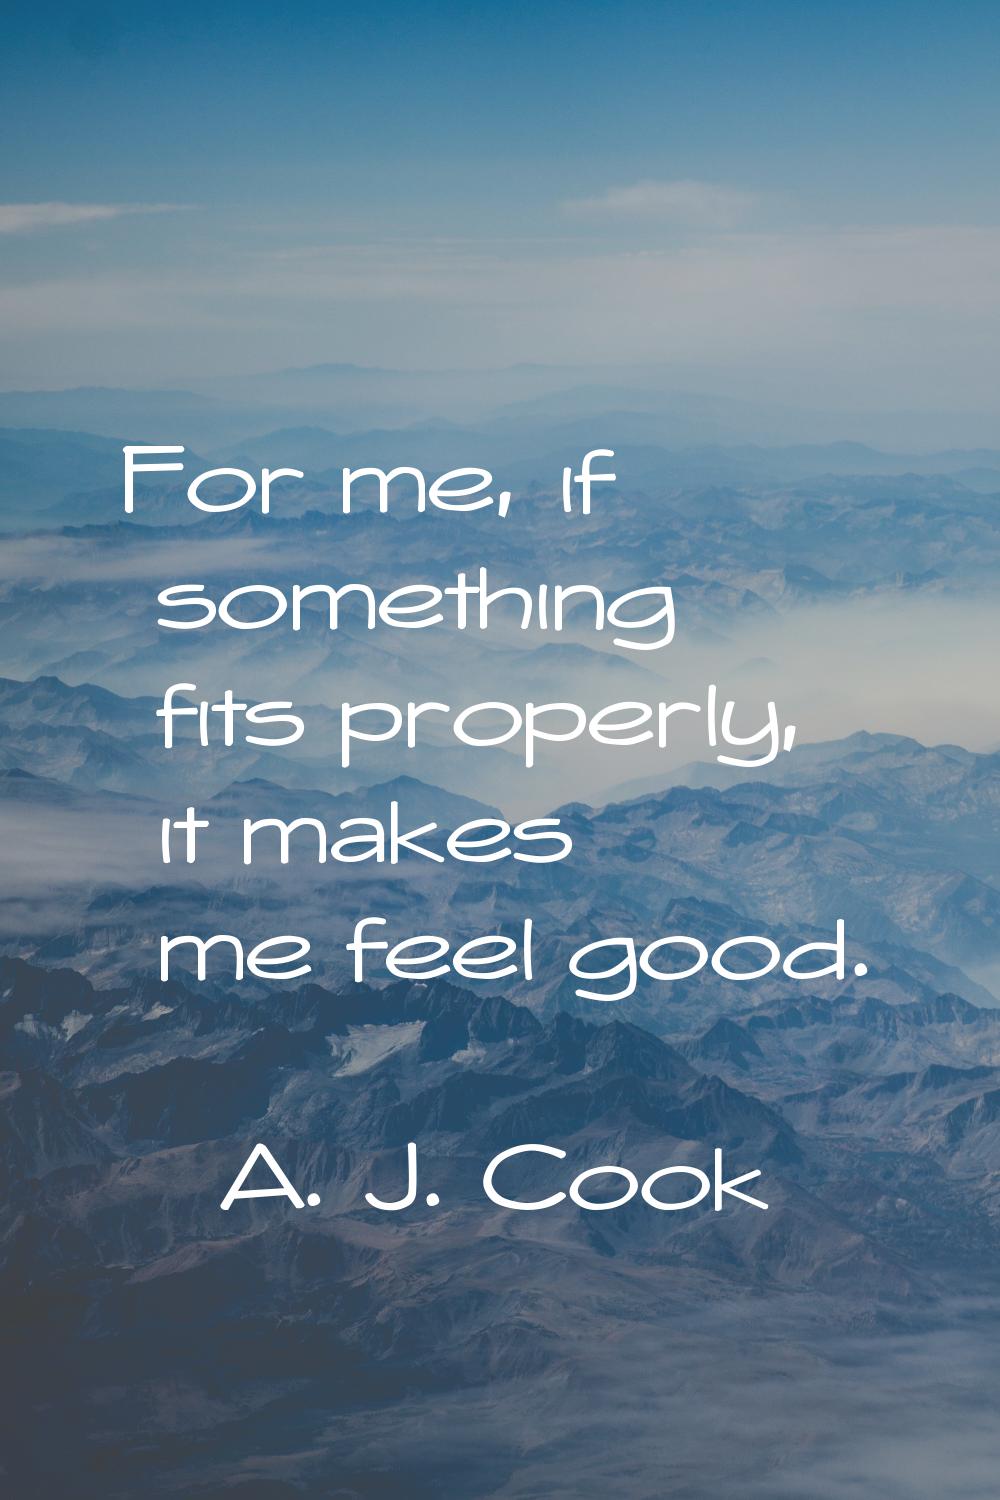 For me, if something fits properly, it makes me feel good.